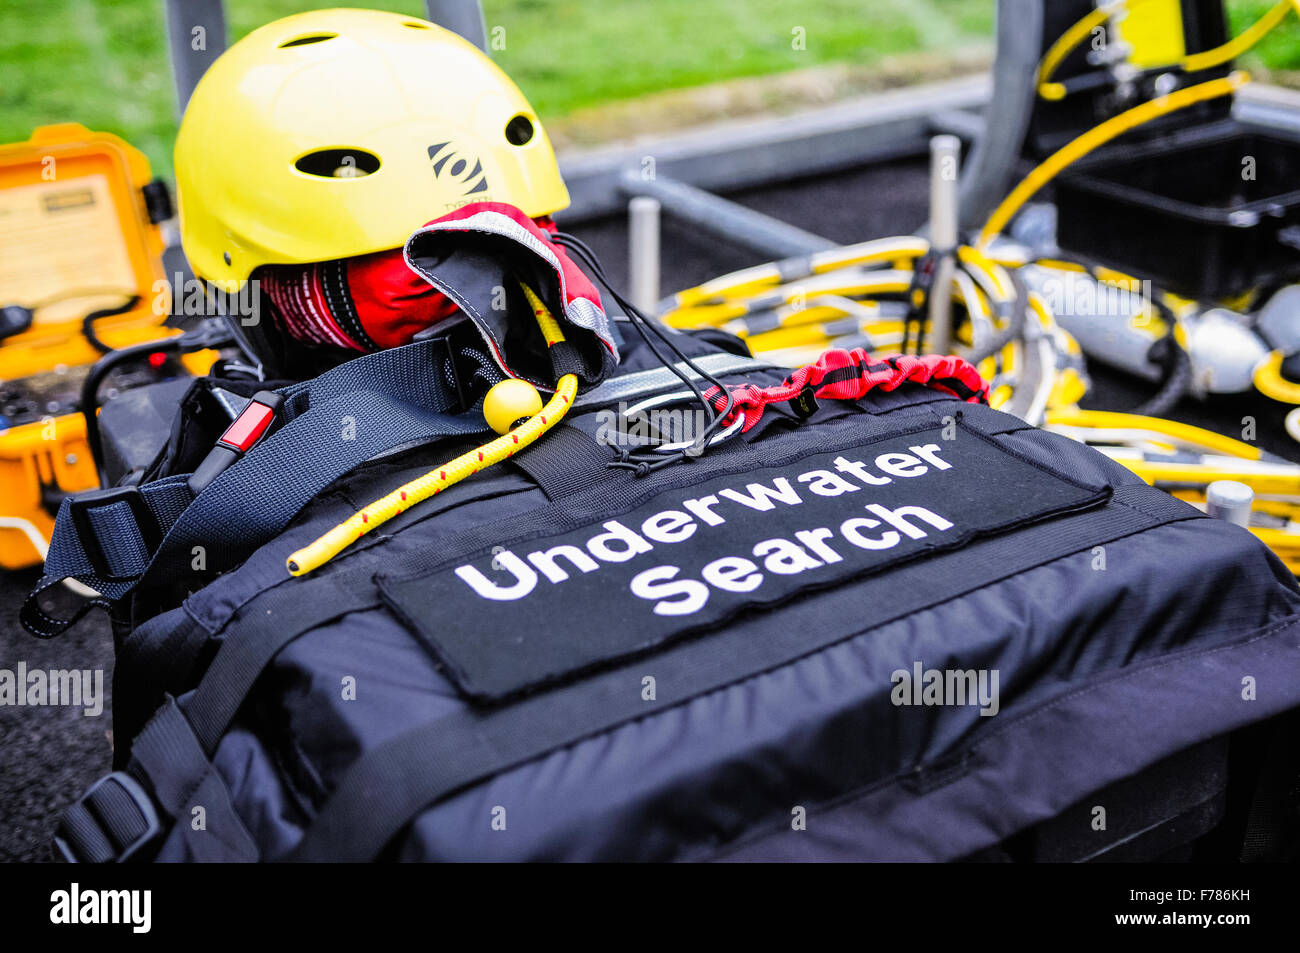 Northern Ireland. 26th November, 2015. Underwater search equipment laid out ready to be used during a rescue operation. Credit:  Stephen Barnes/Alamy Live News Stock Photo